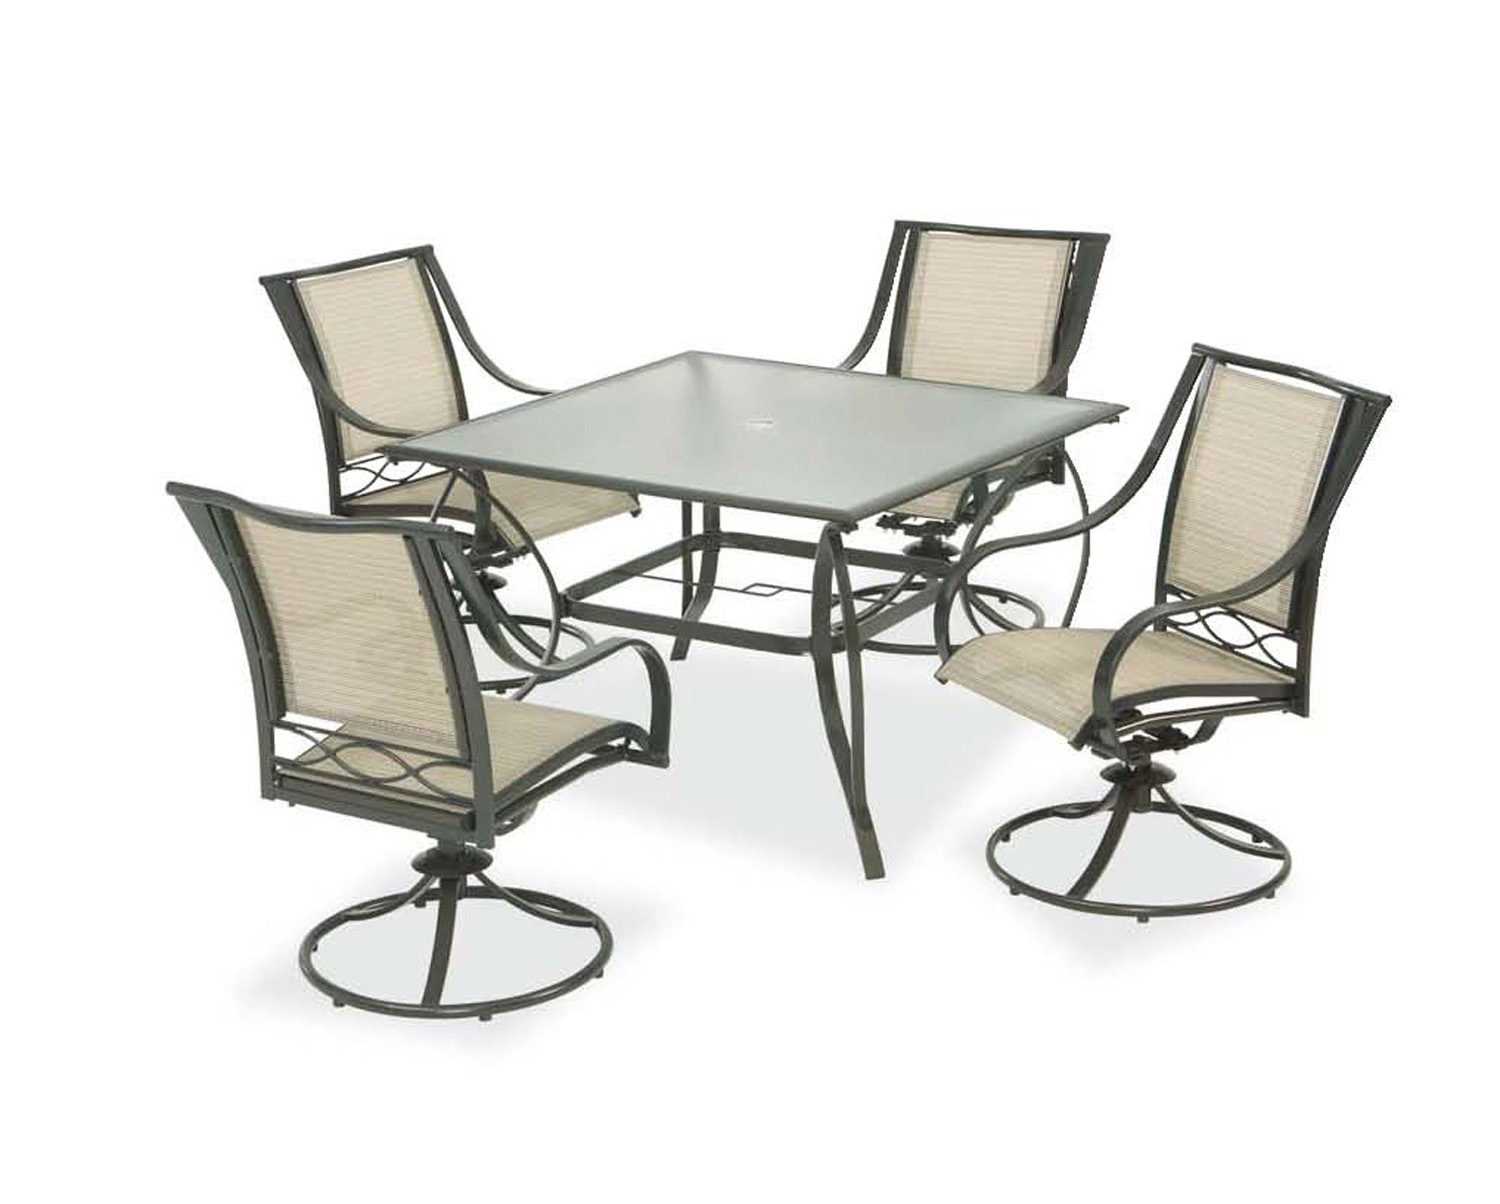 patio chairs sold at home depot recalled because porch life